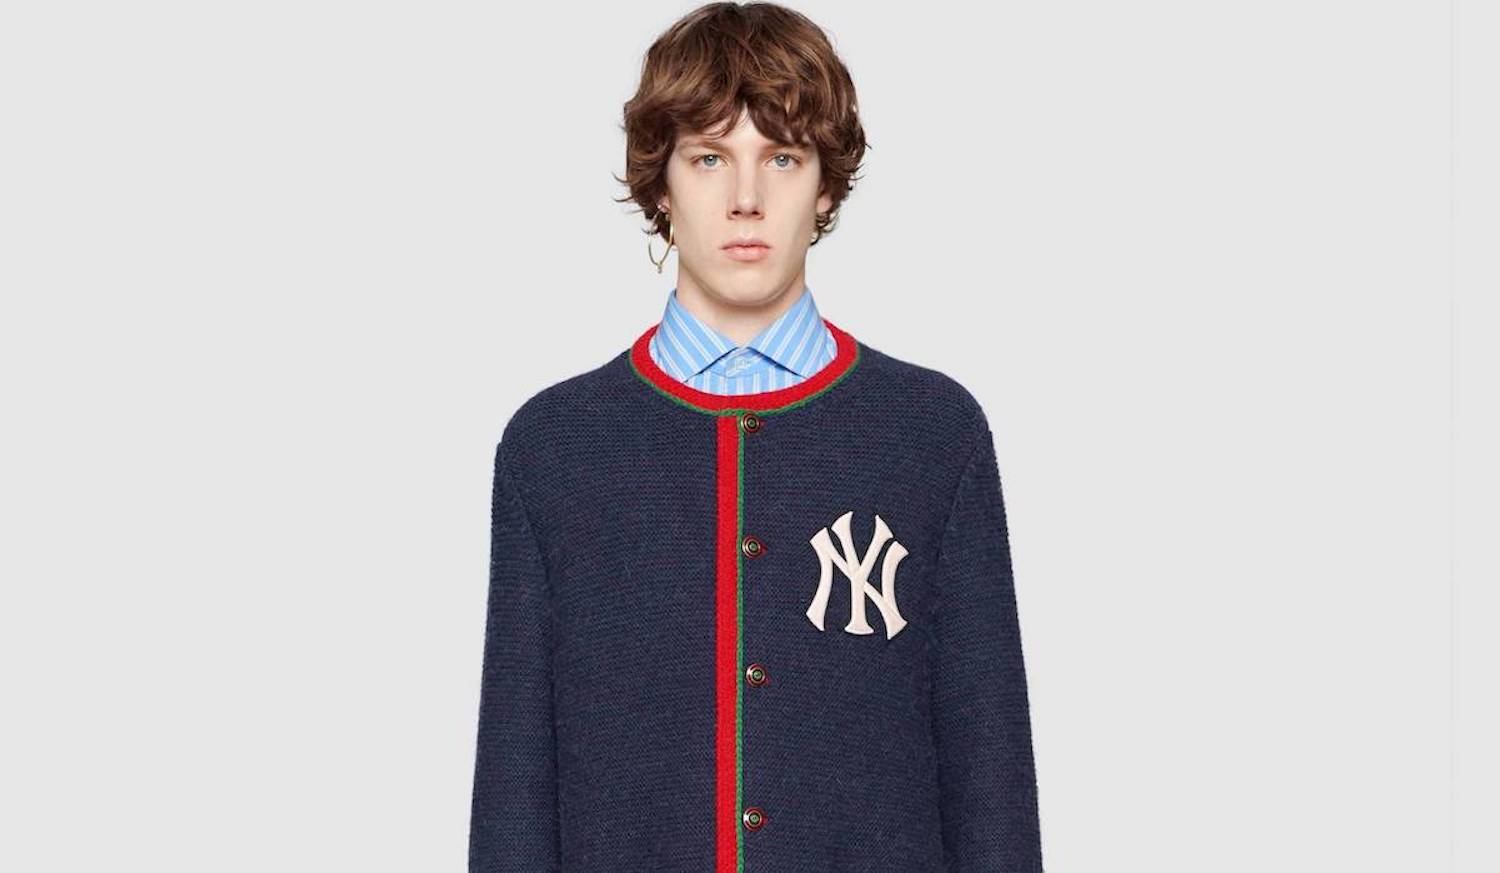 New in Gucci: NY Yankee Knitwear